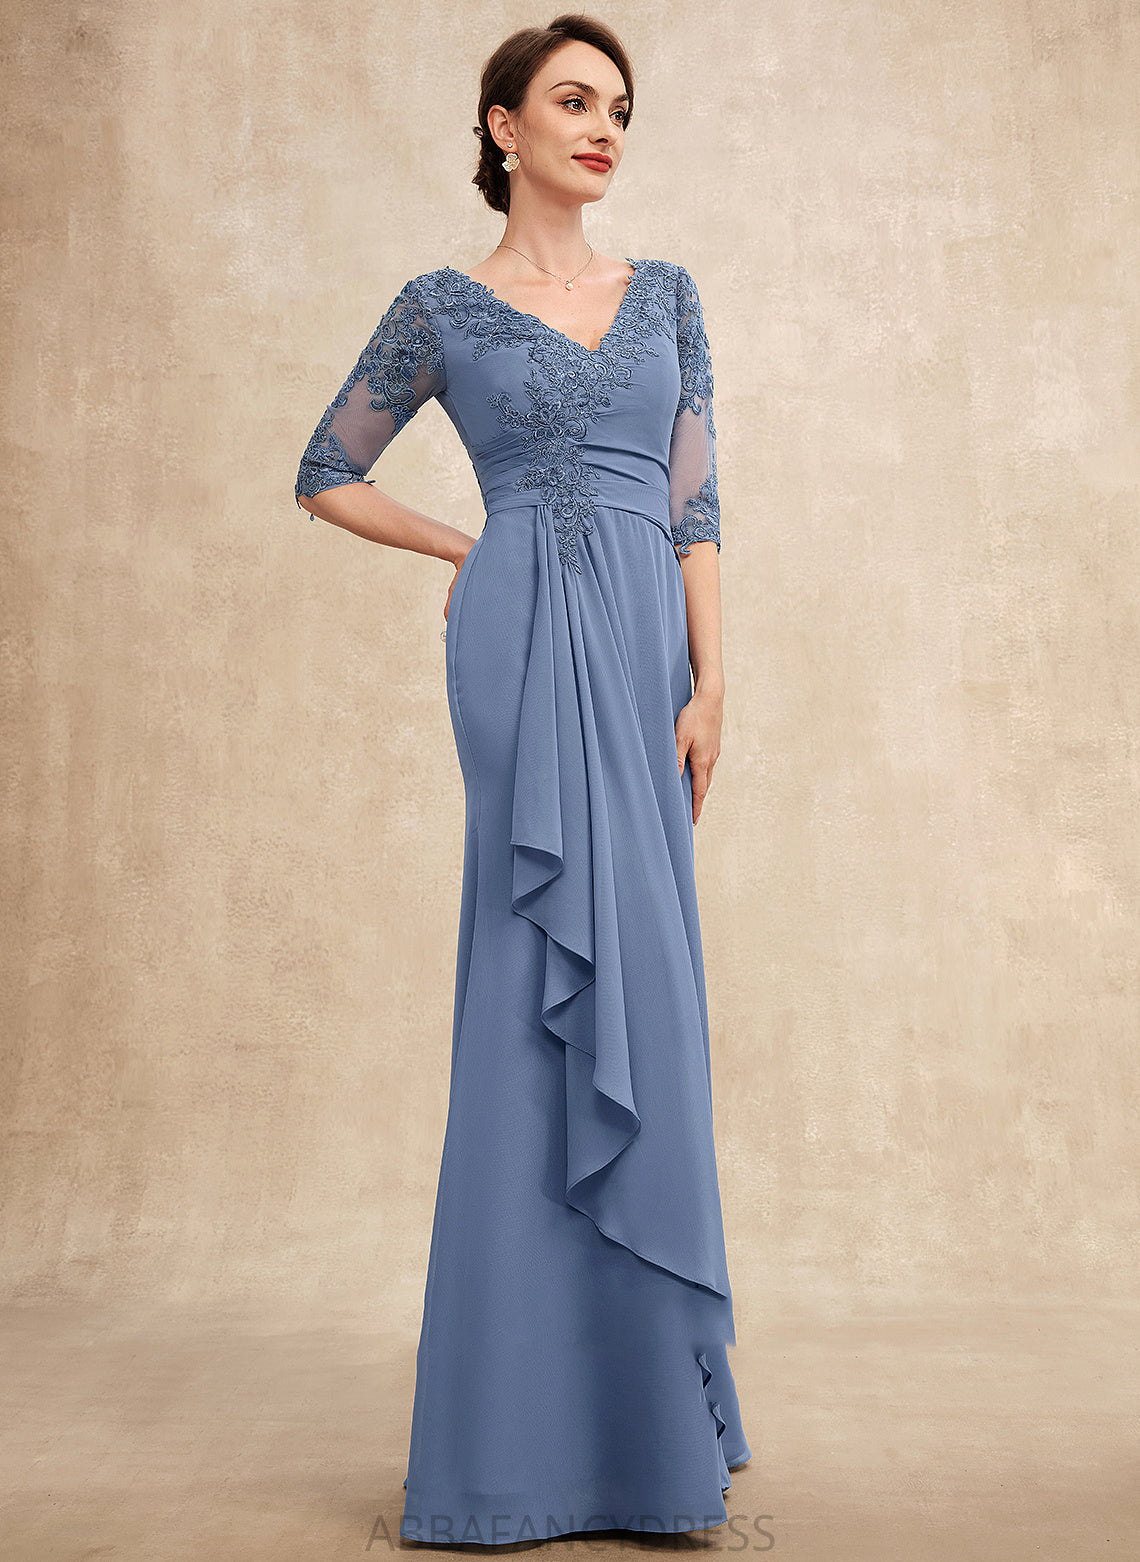 With A-Line Chiffon Dress of Erin Ruffles V-neck Floor-Length the Mother Cascading Mother of the Bride Dresses Lace Bride